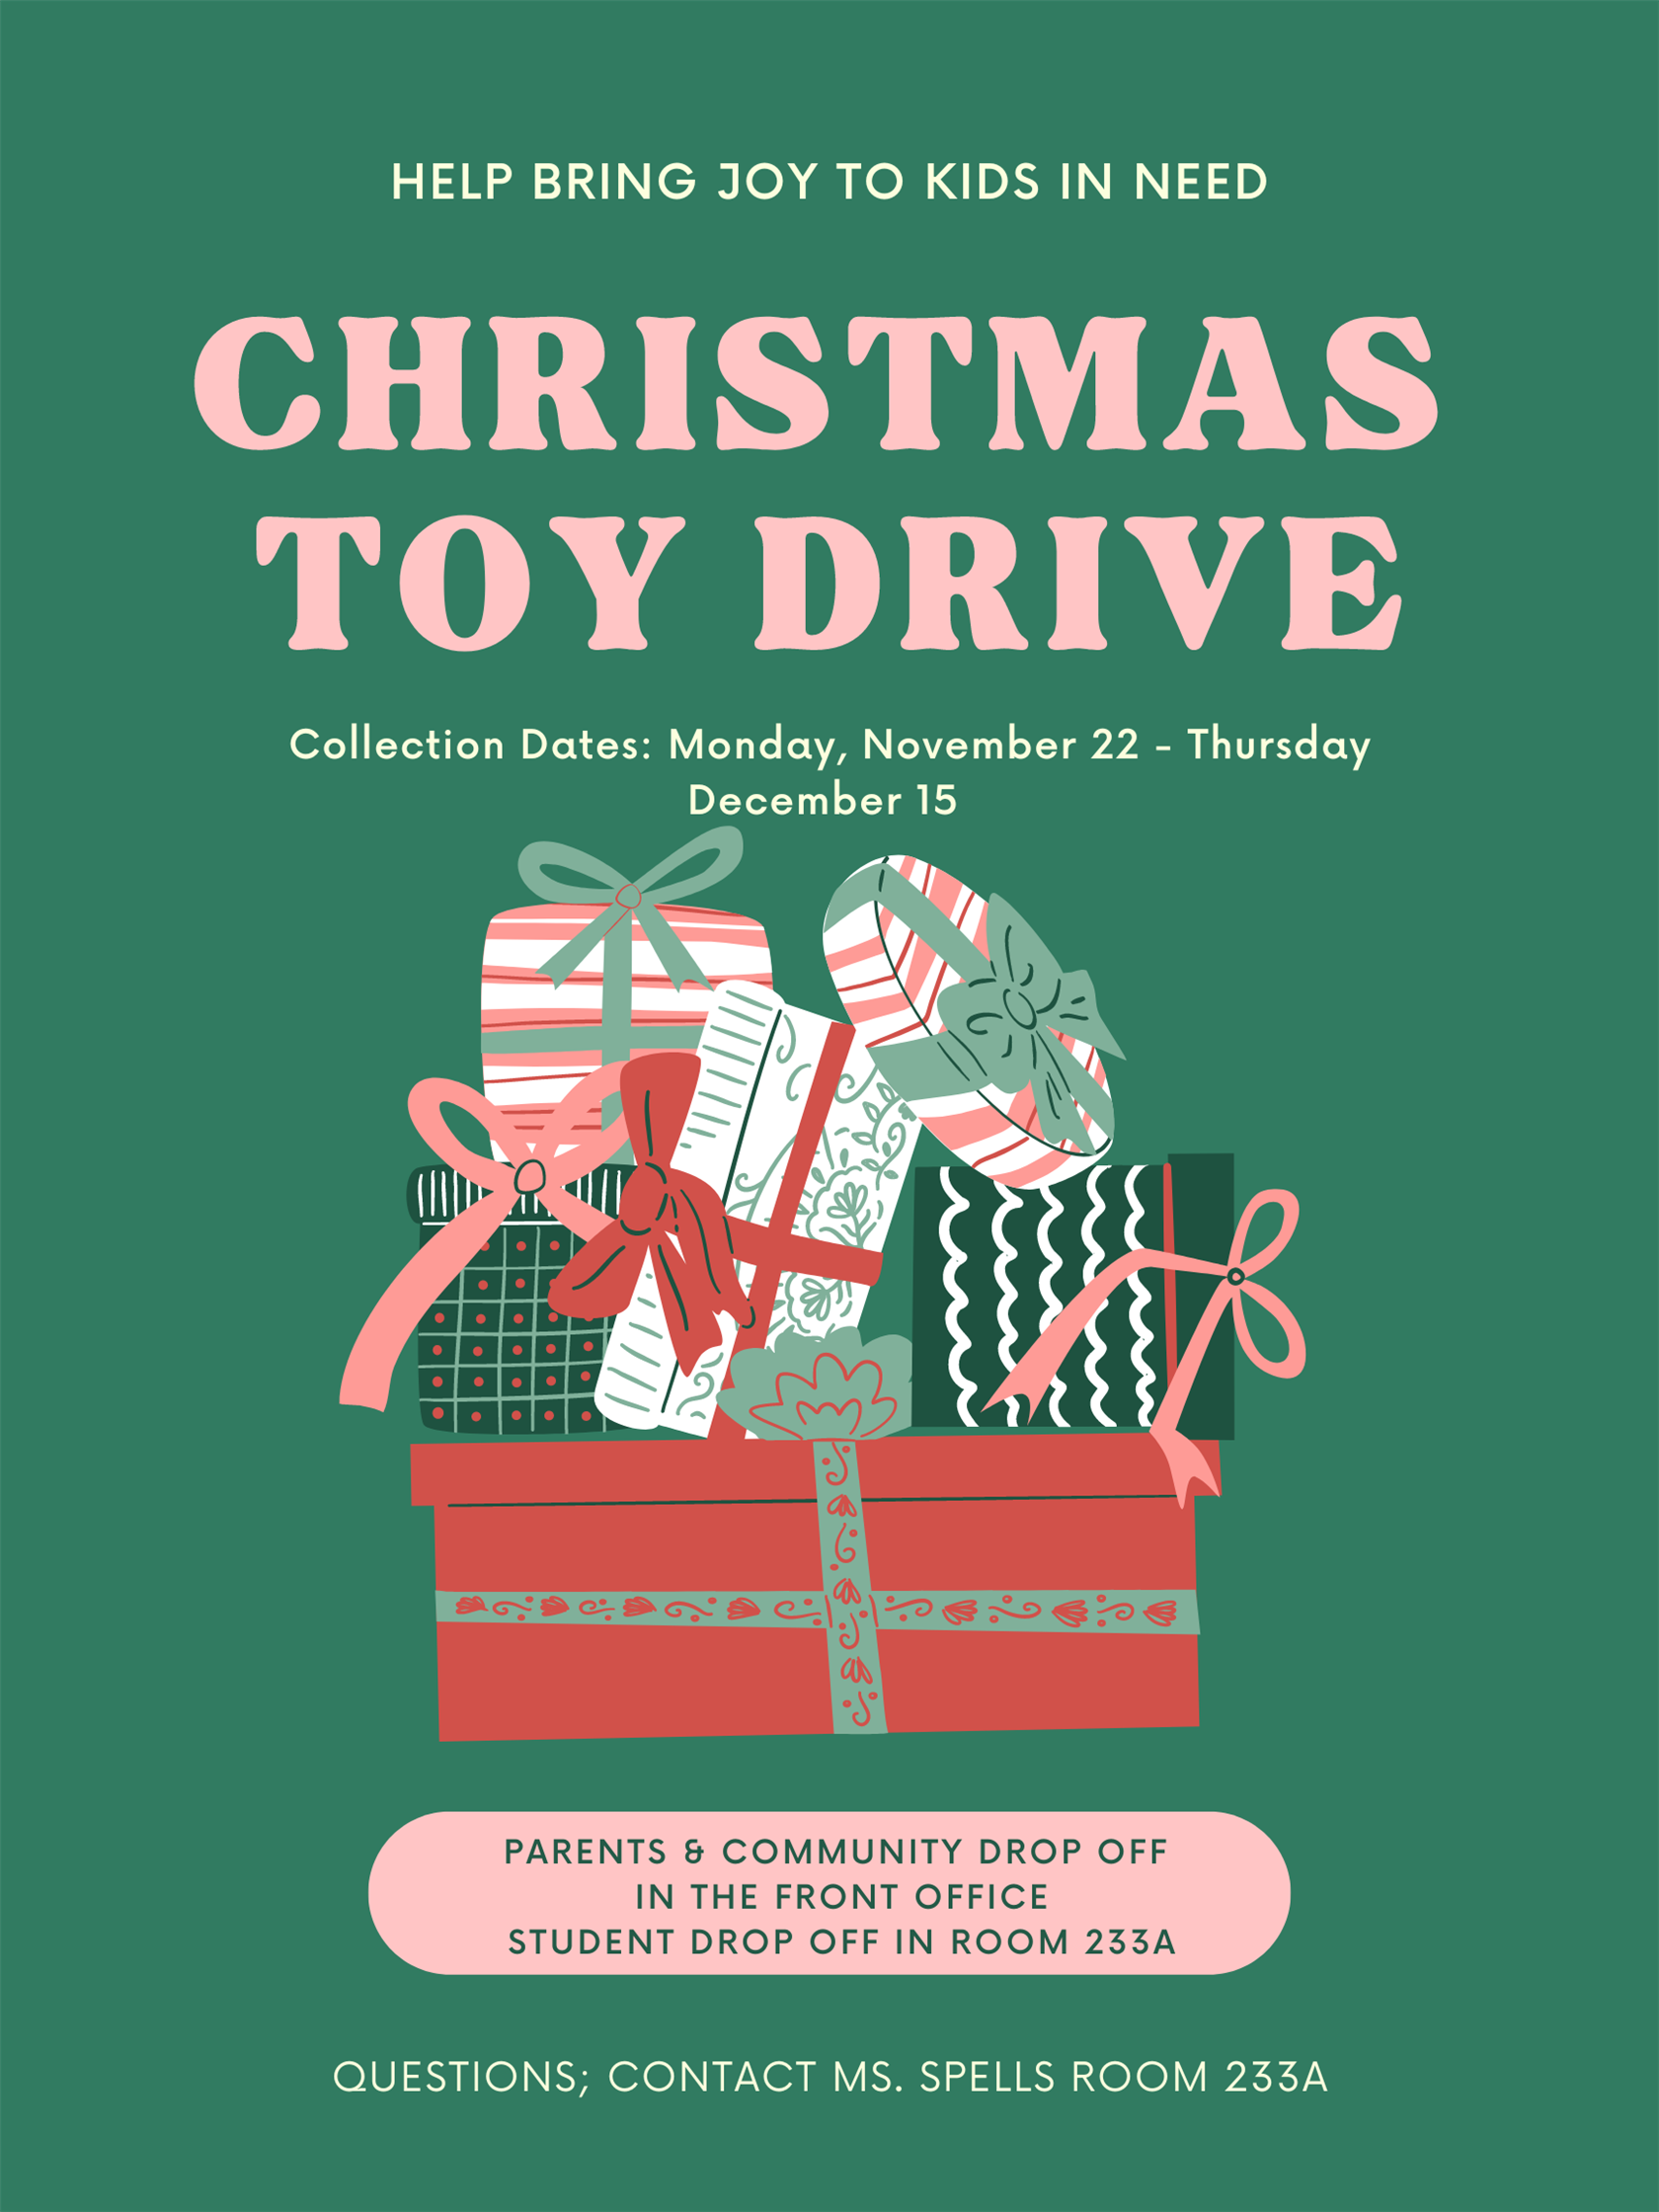  Please participate in the HOSA Toy Drive and Food Drive now through December 15th.